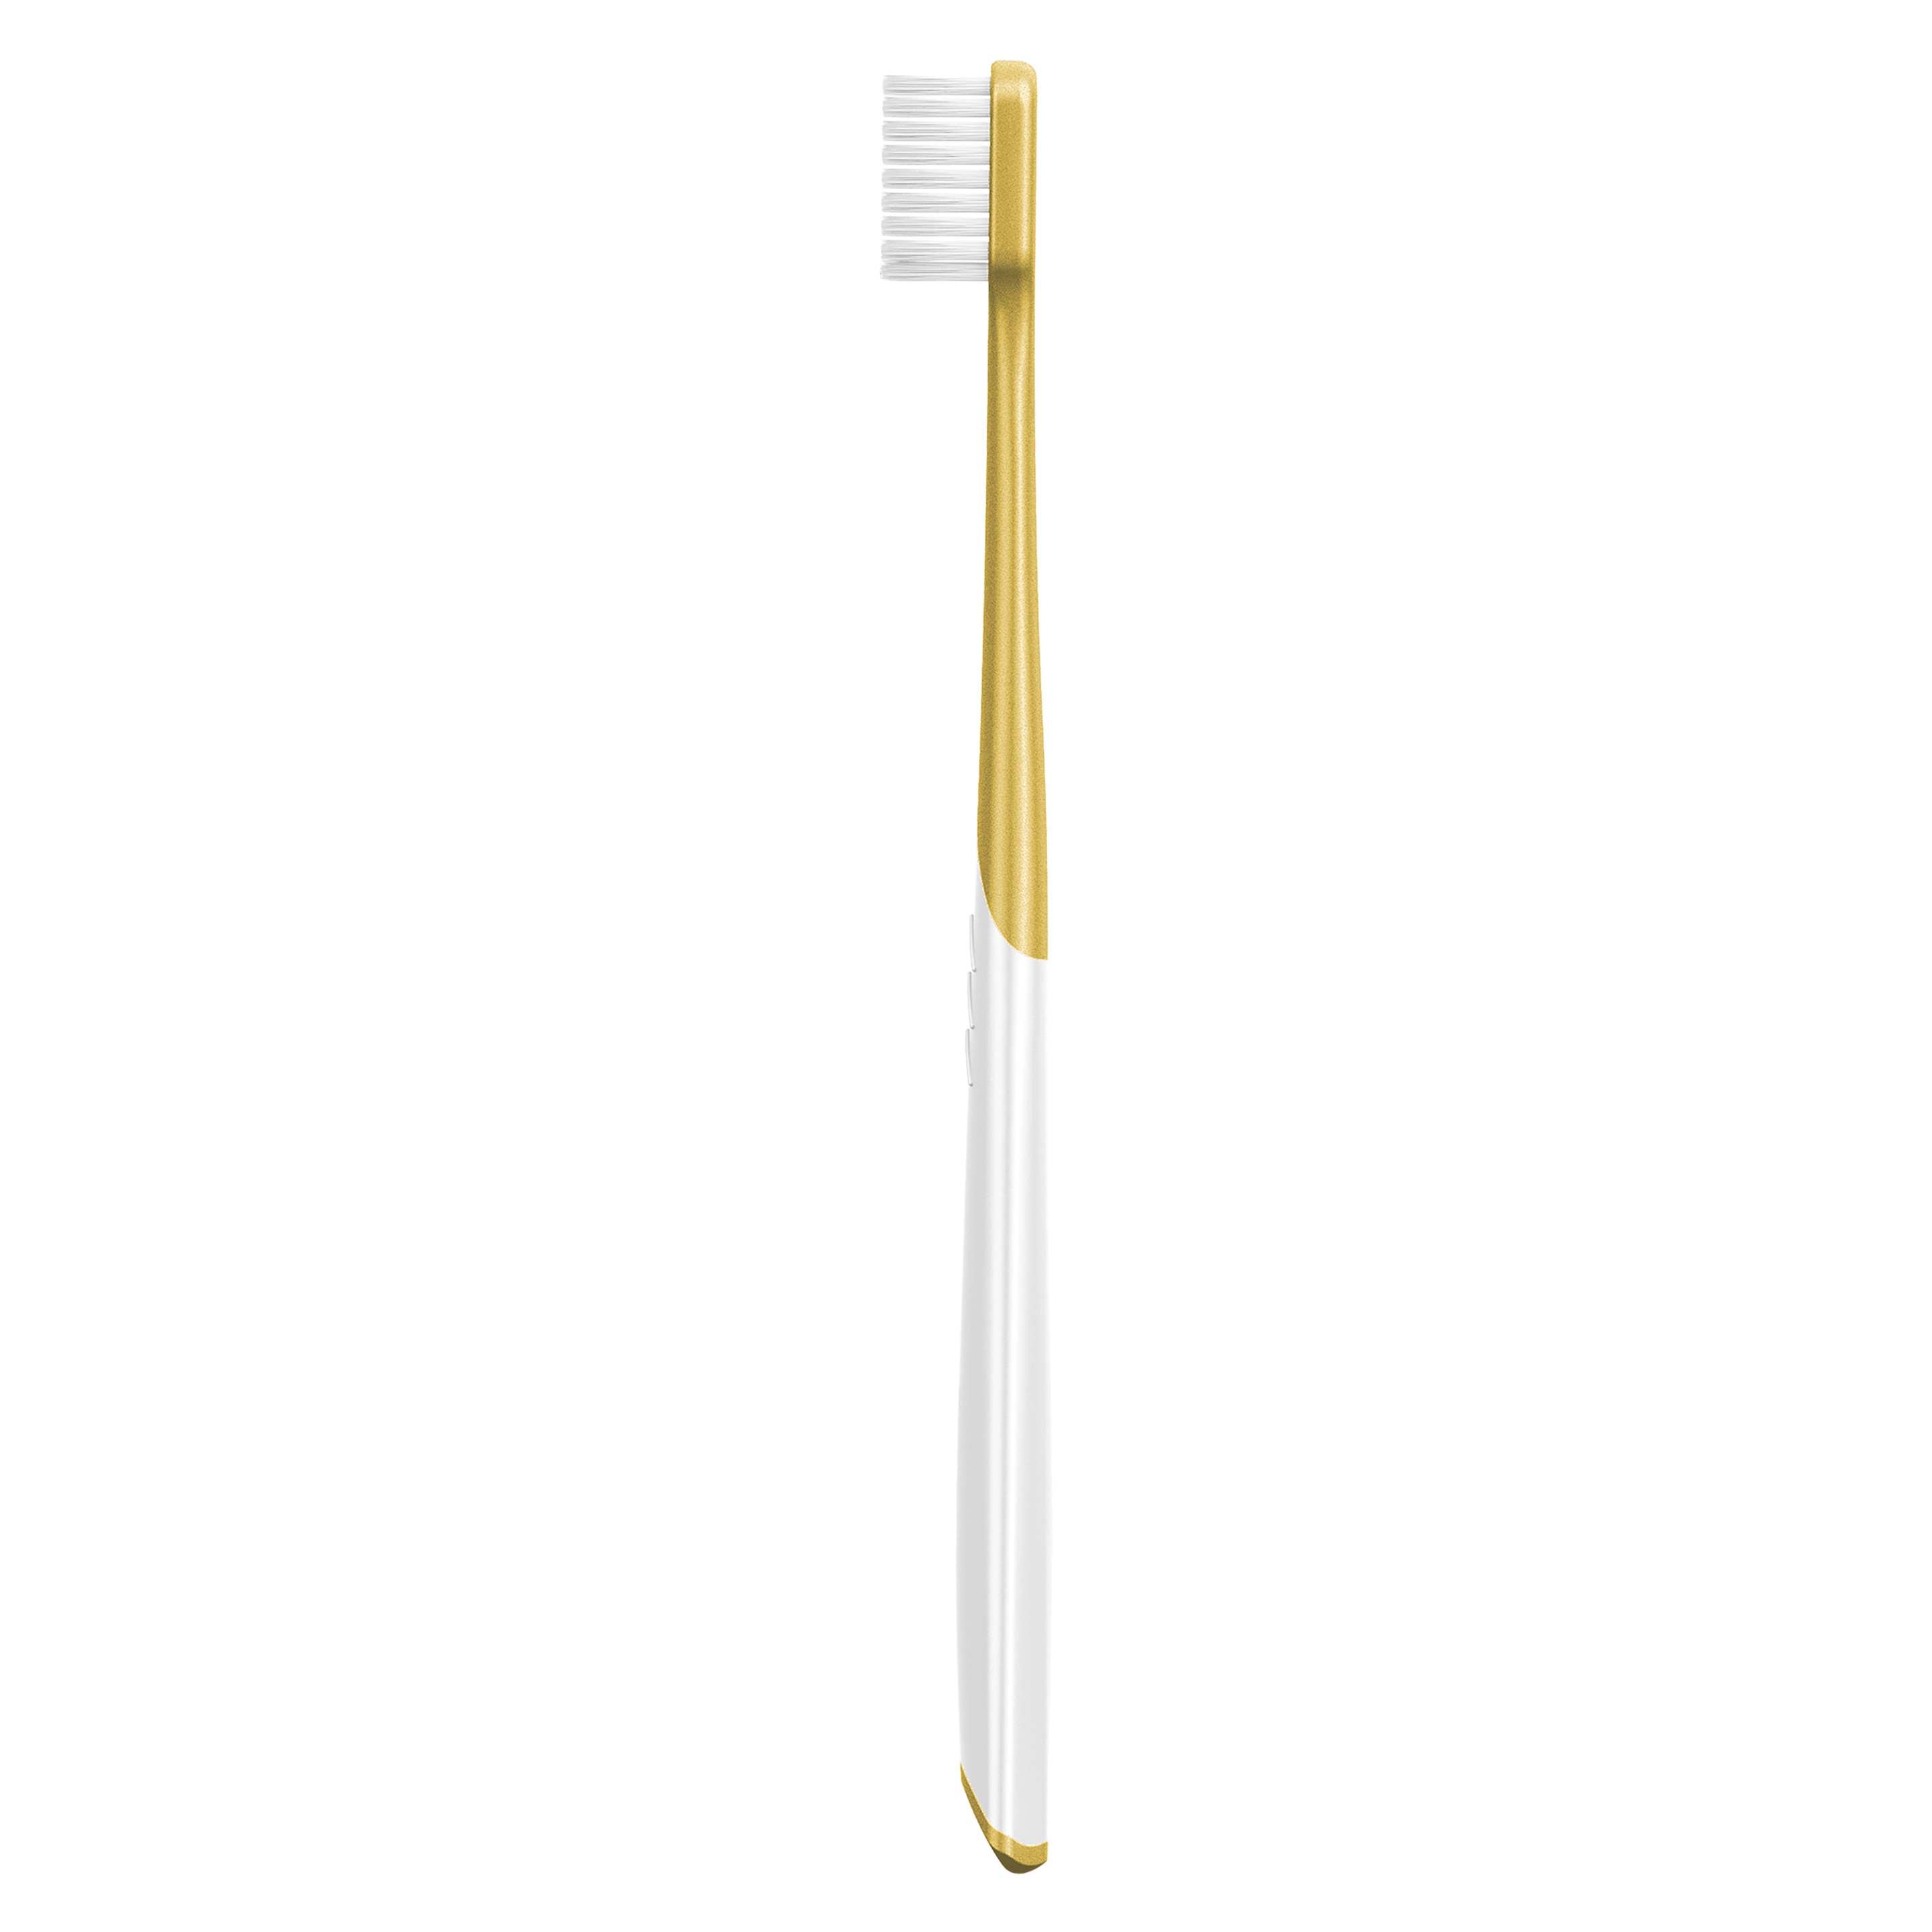 Closeup White Now Toothbrush Forever White Soft